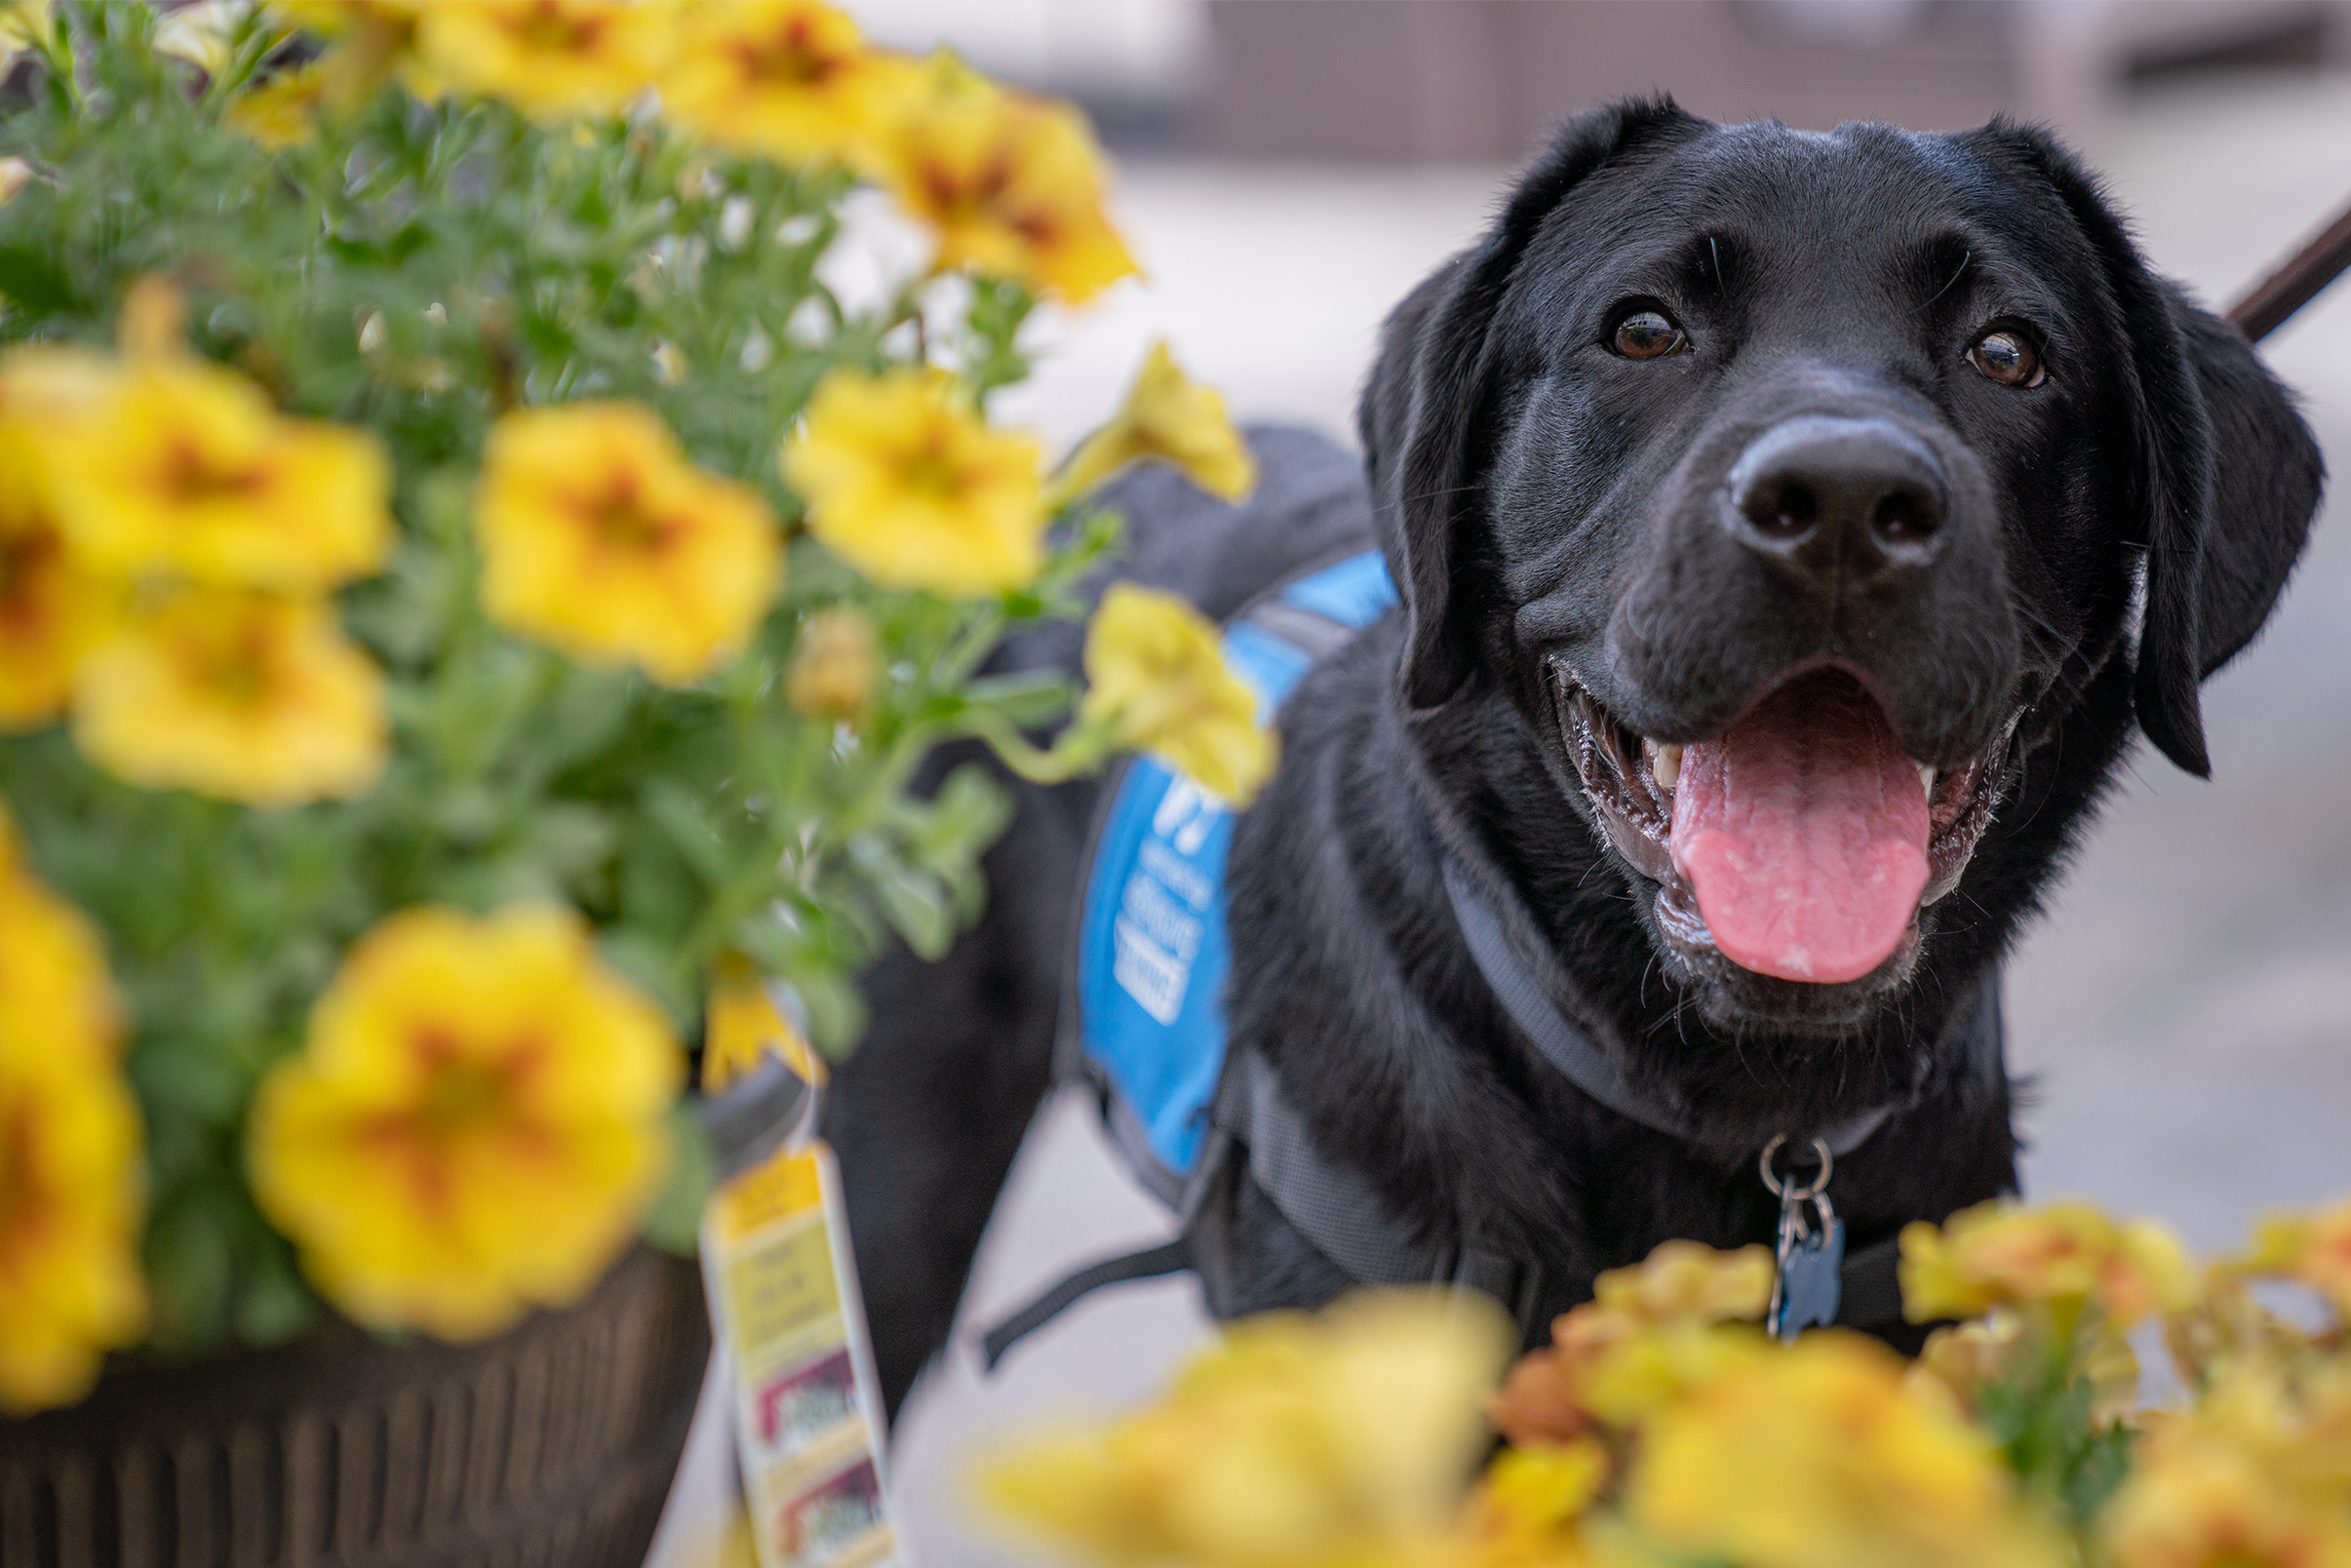 A black lab puppy looks through a bush of yellow flowers